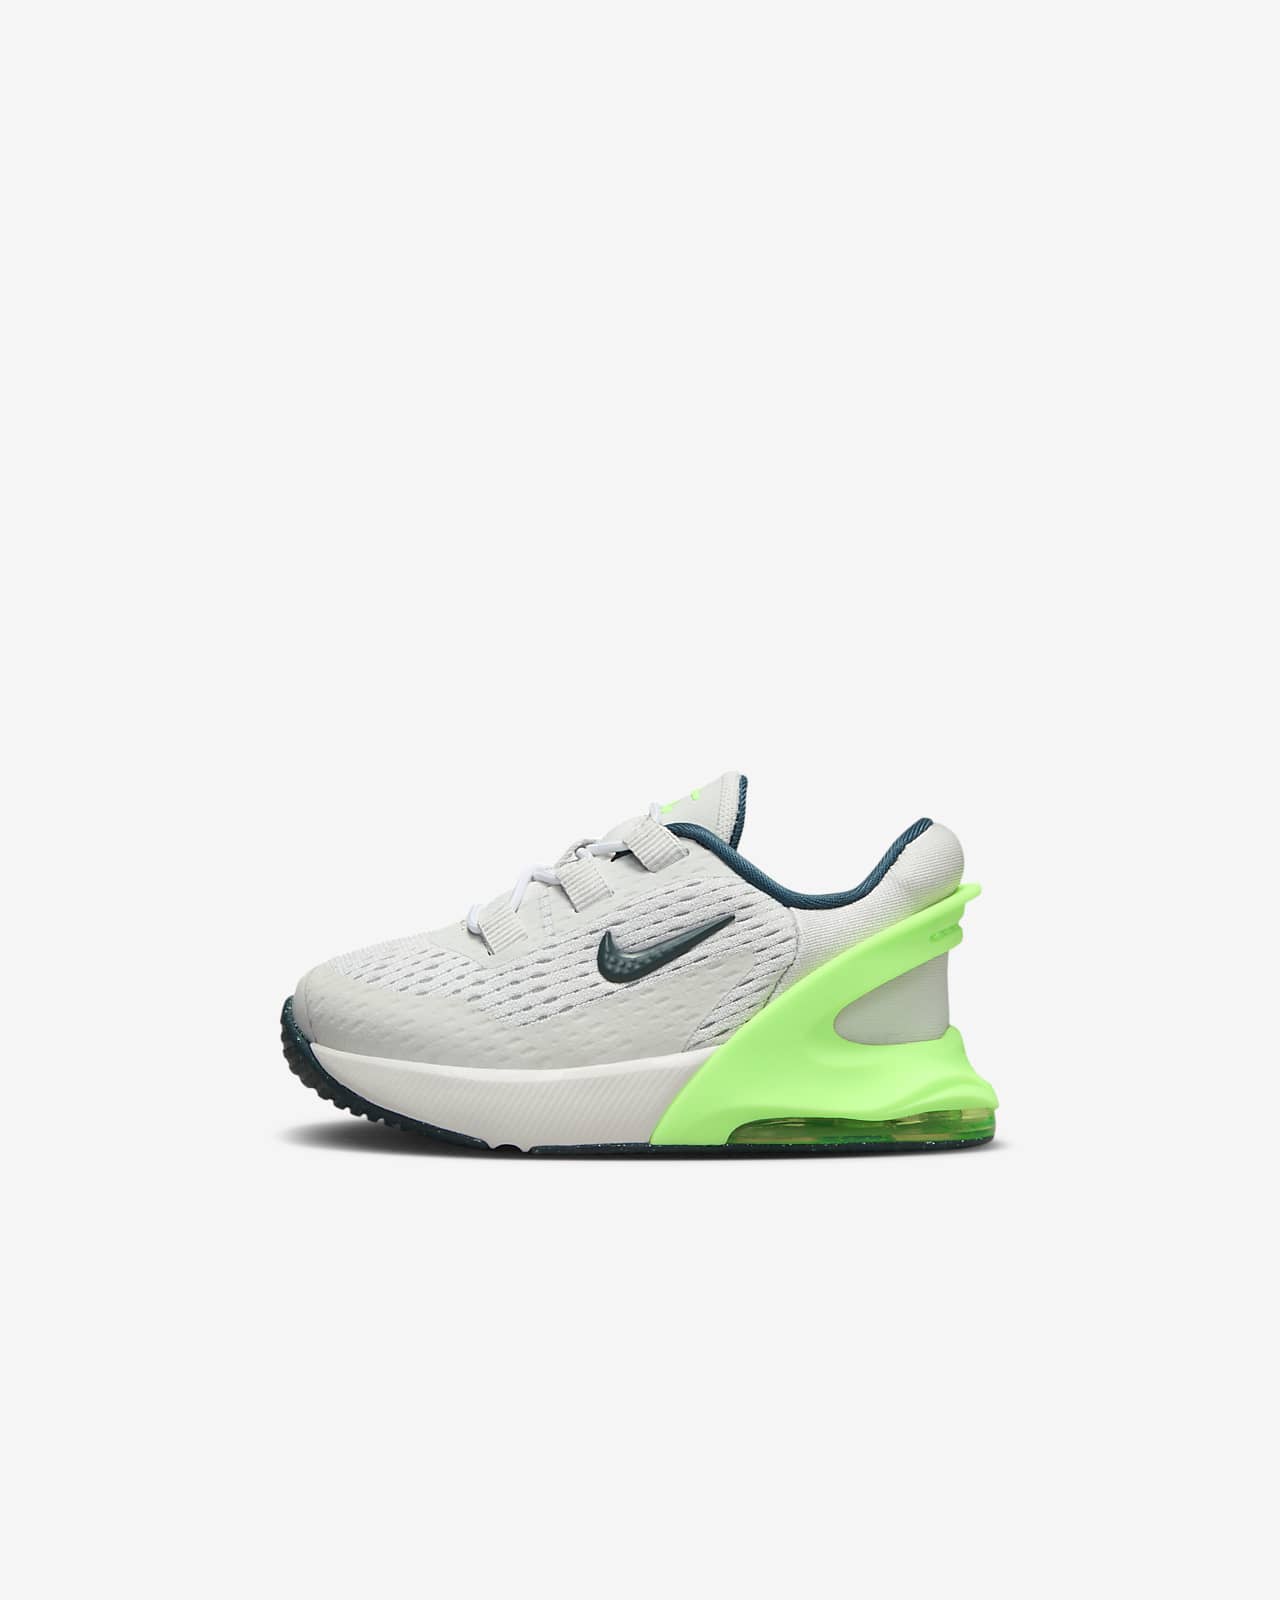 Nike Air Max 270 Baby/Toddler Shoes